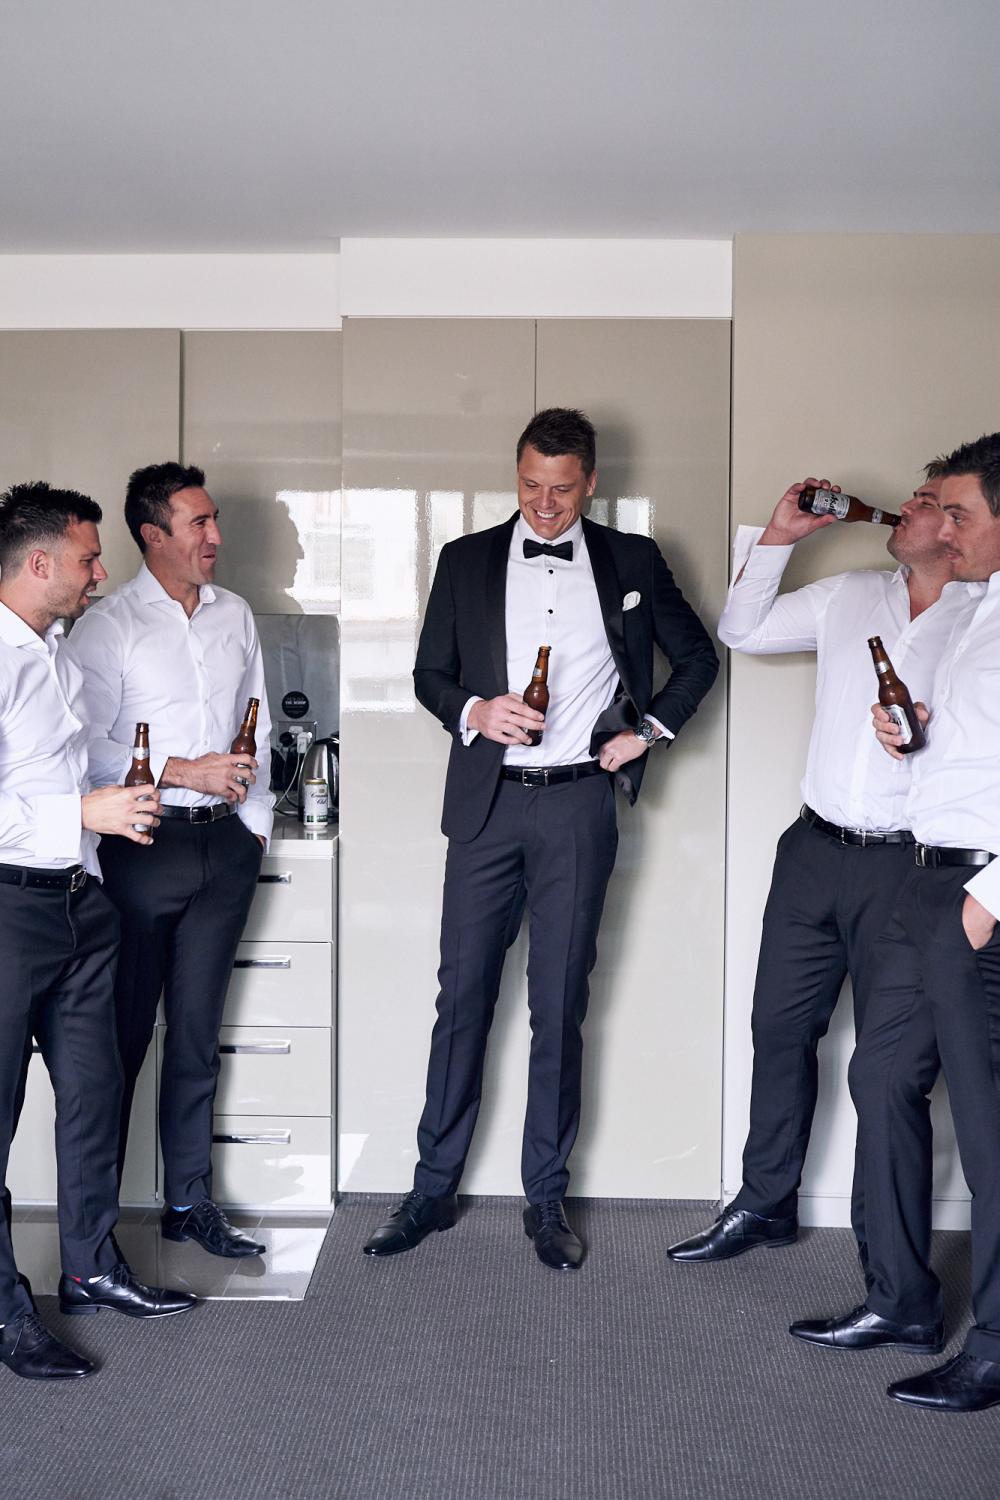 A Groom and his groomsmen enjoying a beer before the wedding together